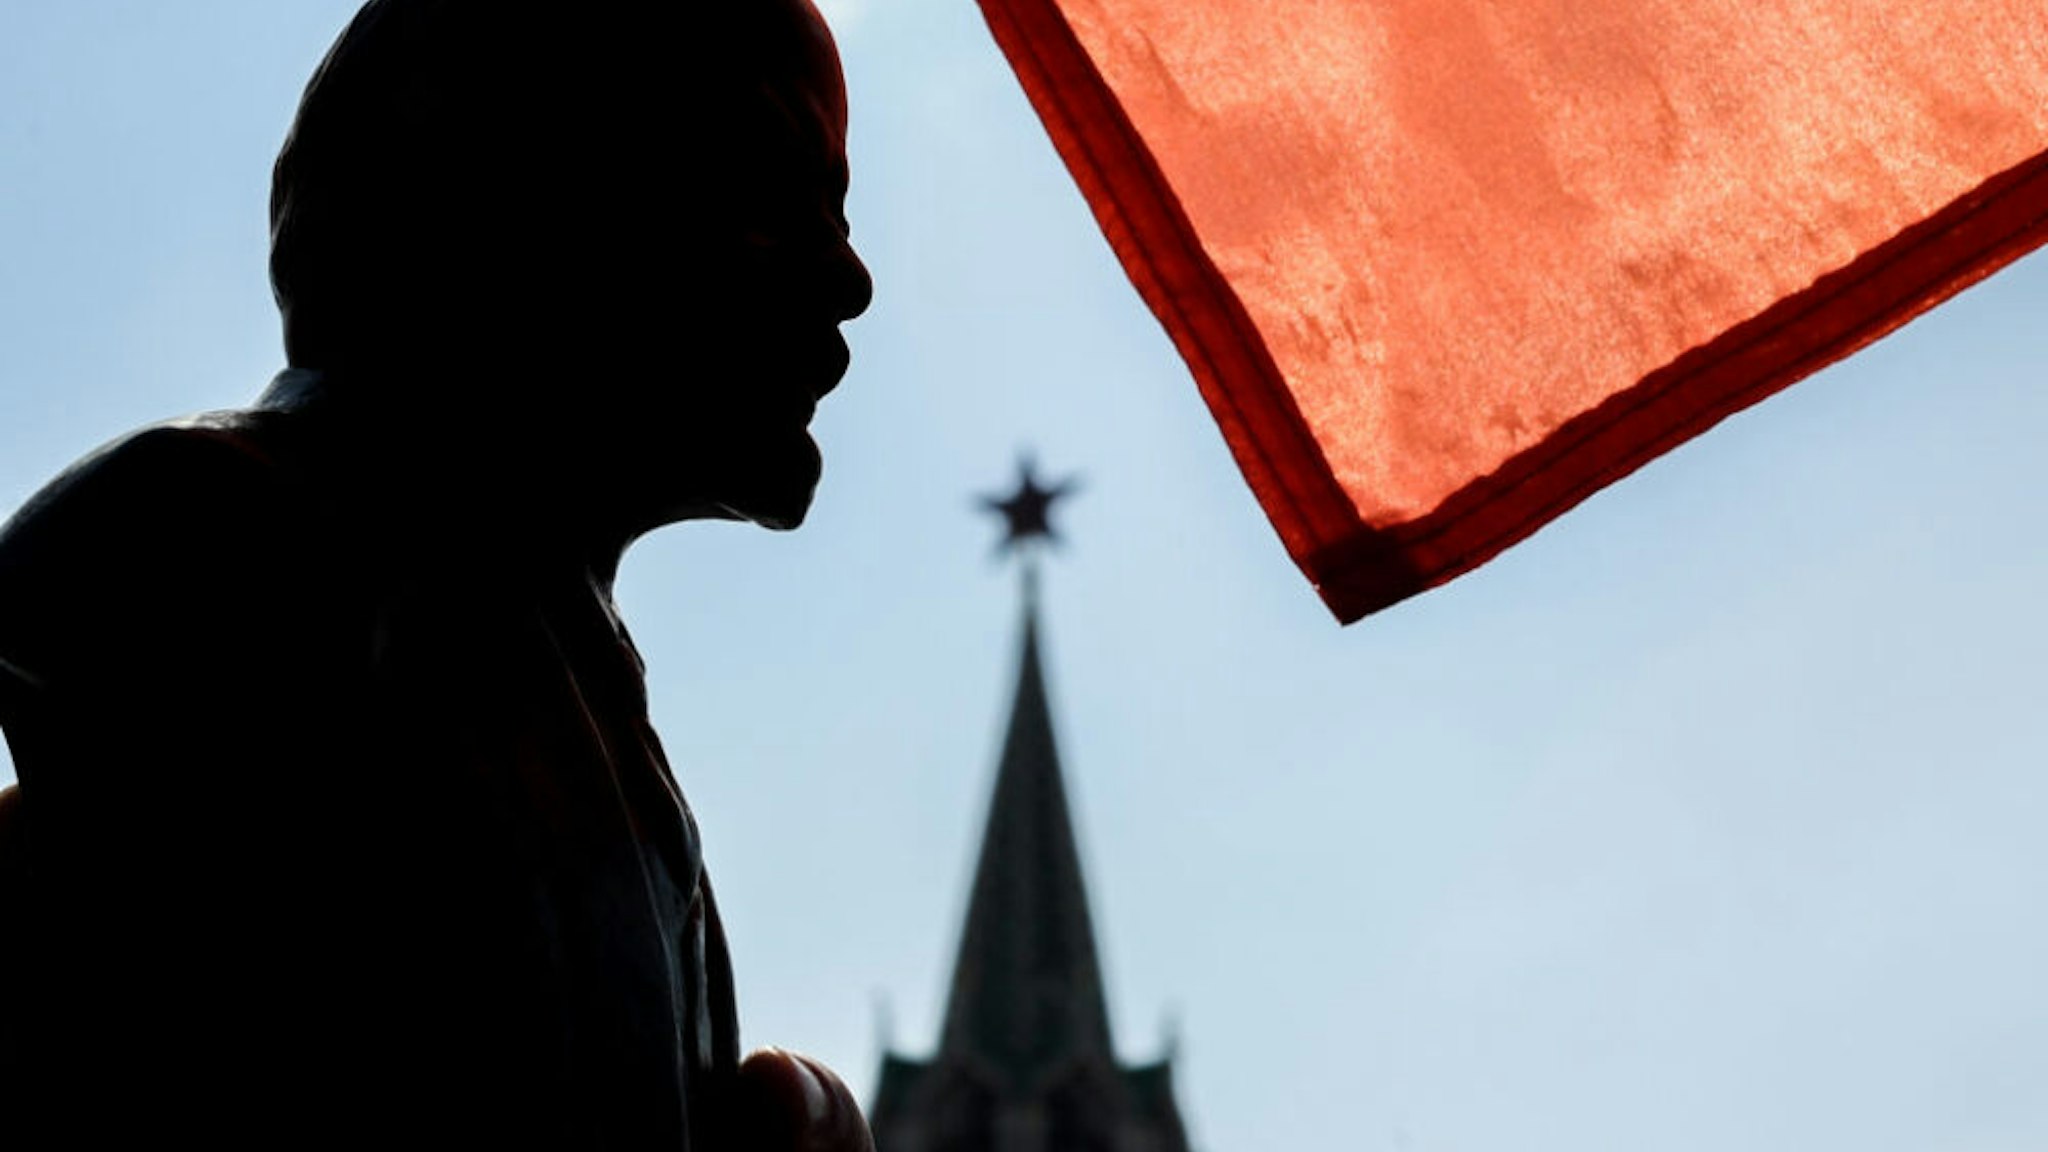 TOPSHOT - A red flag is seen above a bust of the Soviet state founder and revolutionary leader Vladimir Ilyich Ulyanov aka Lenin as Russian Communist party members and supporters attend a flower-laying ceremony marking the 149th anniversary of his birth, on Red Square in Moscow, April 22, 2019.